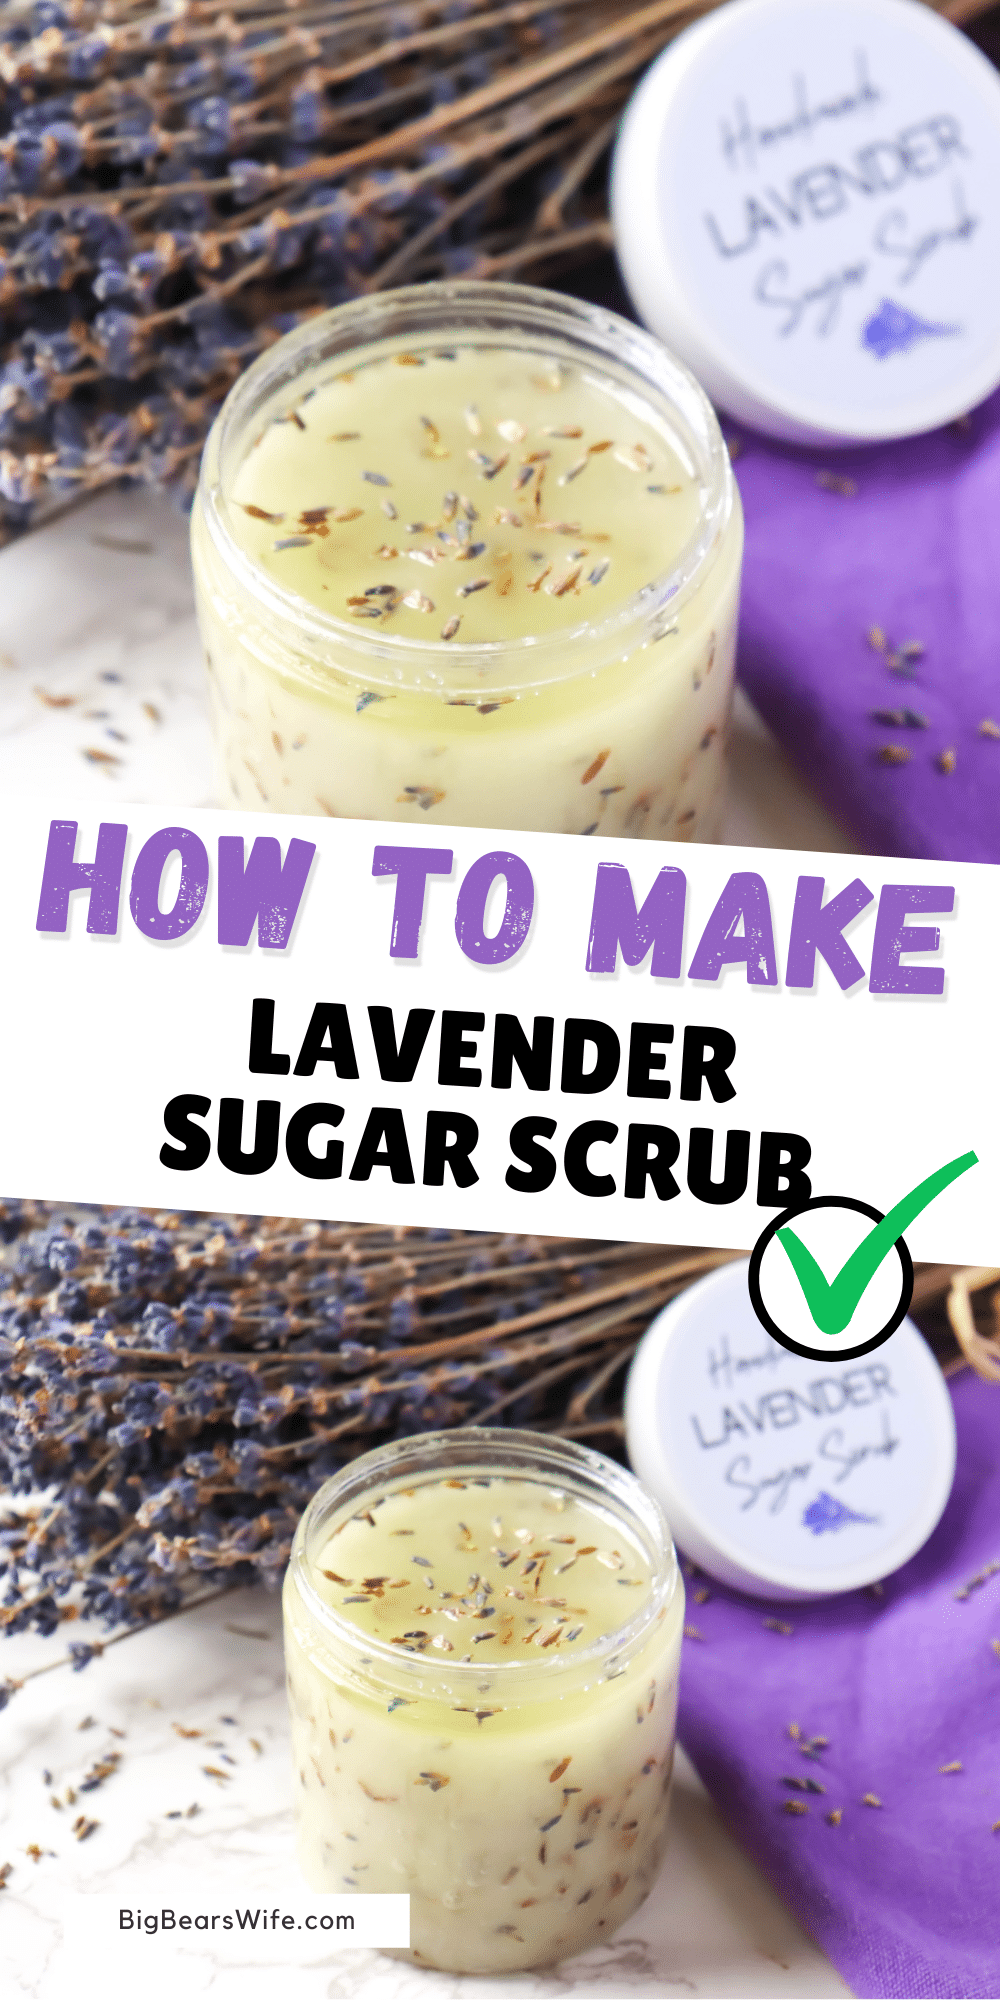 You'll love how easy this Homemade Lavender Sugar Scrub is to make! This homemade sugar scrub makes your skin super soft, it's simple to make and great for a DIY homemade gift!  via @bigbearswife